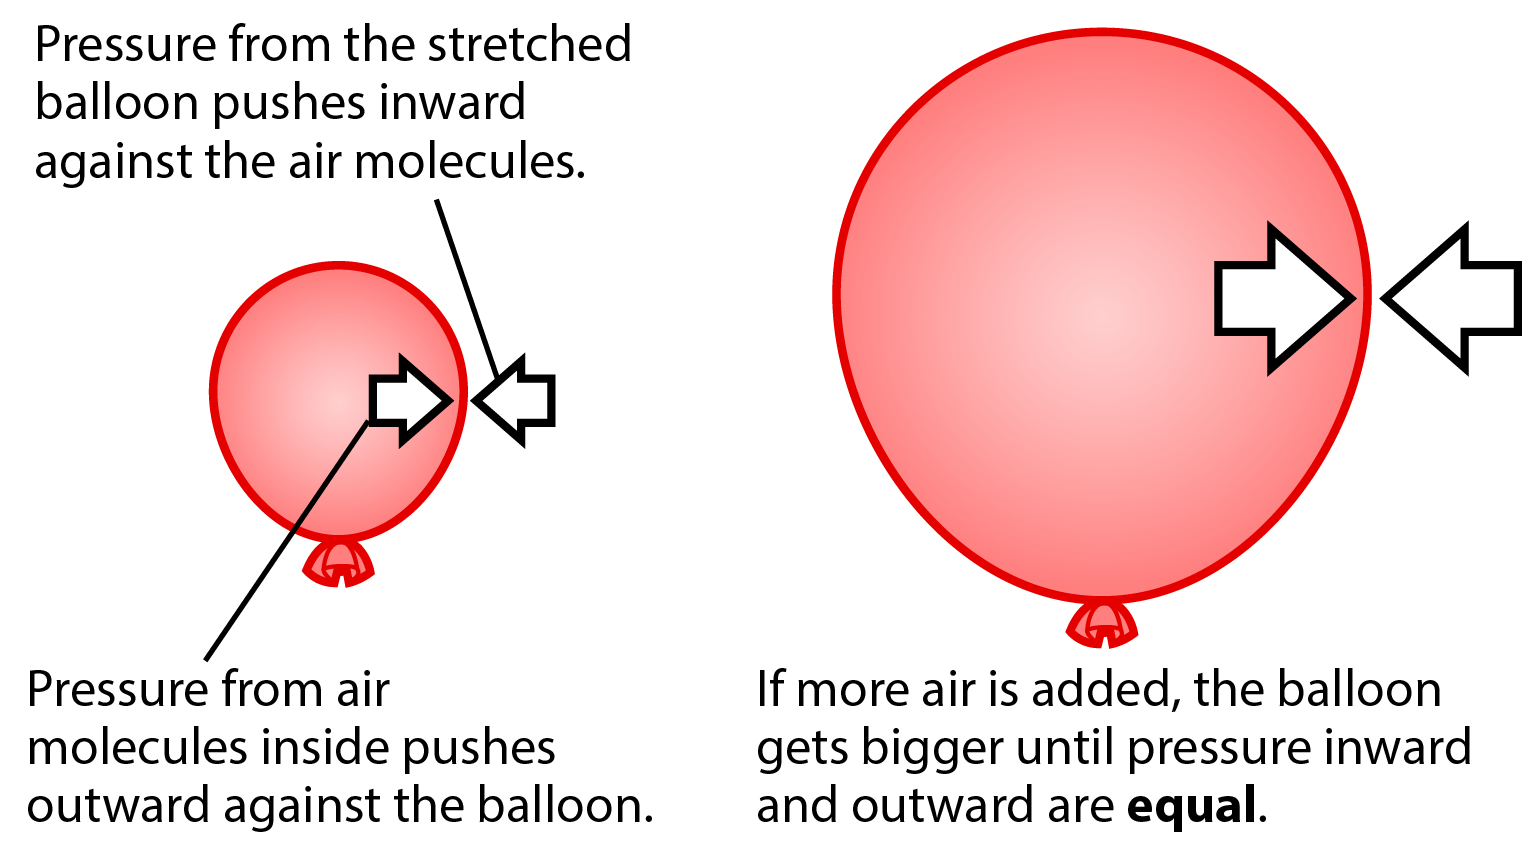 Small and large balloon with arrows showing where the pessure from the air molecules pushes outward against the balloon, and where pressure from the balloon purshes inward against the air molecules.